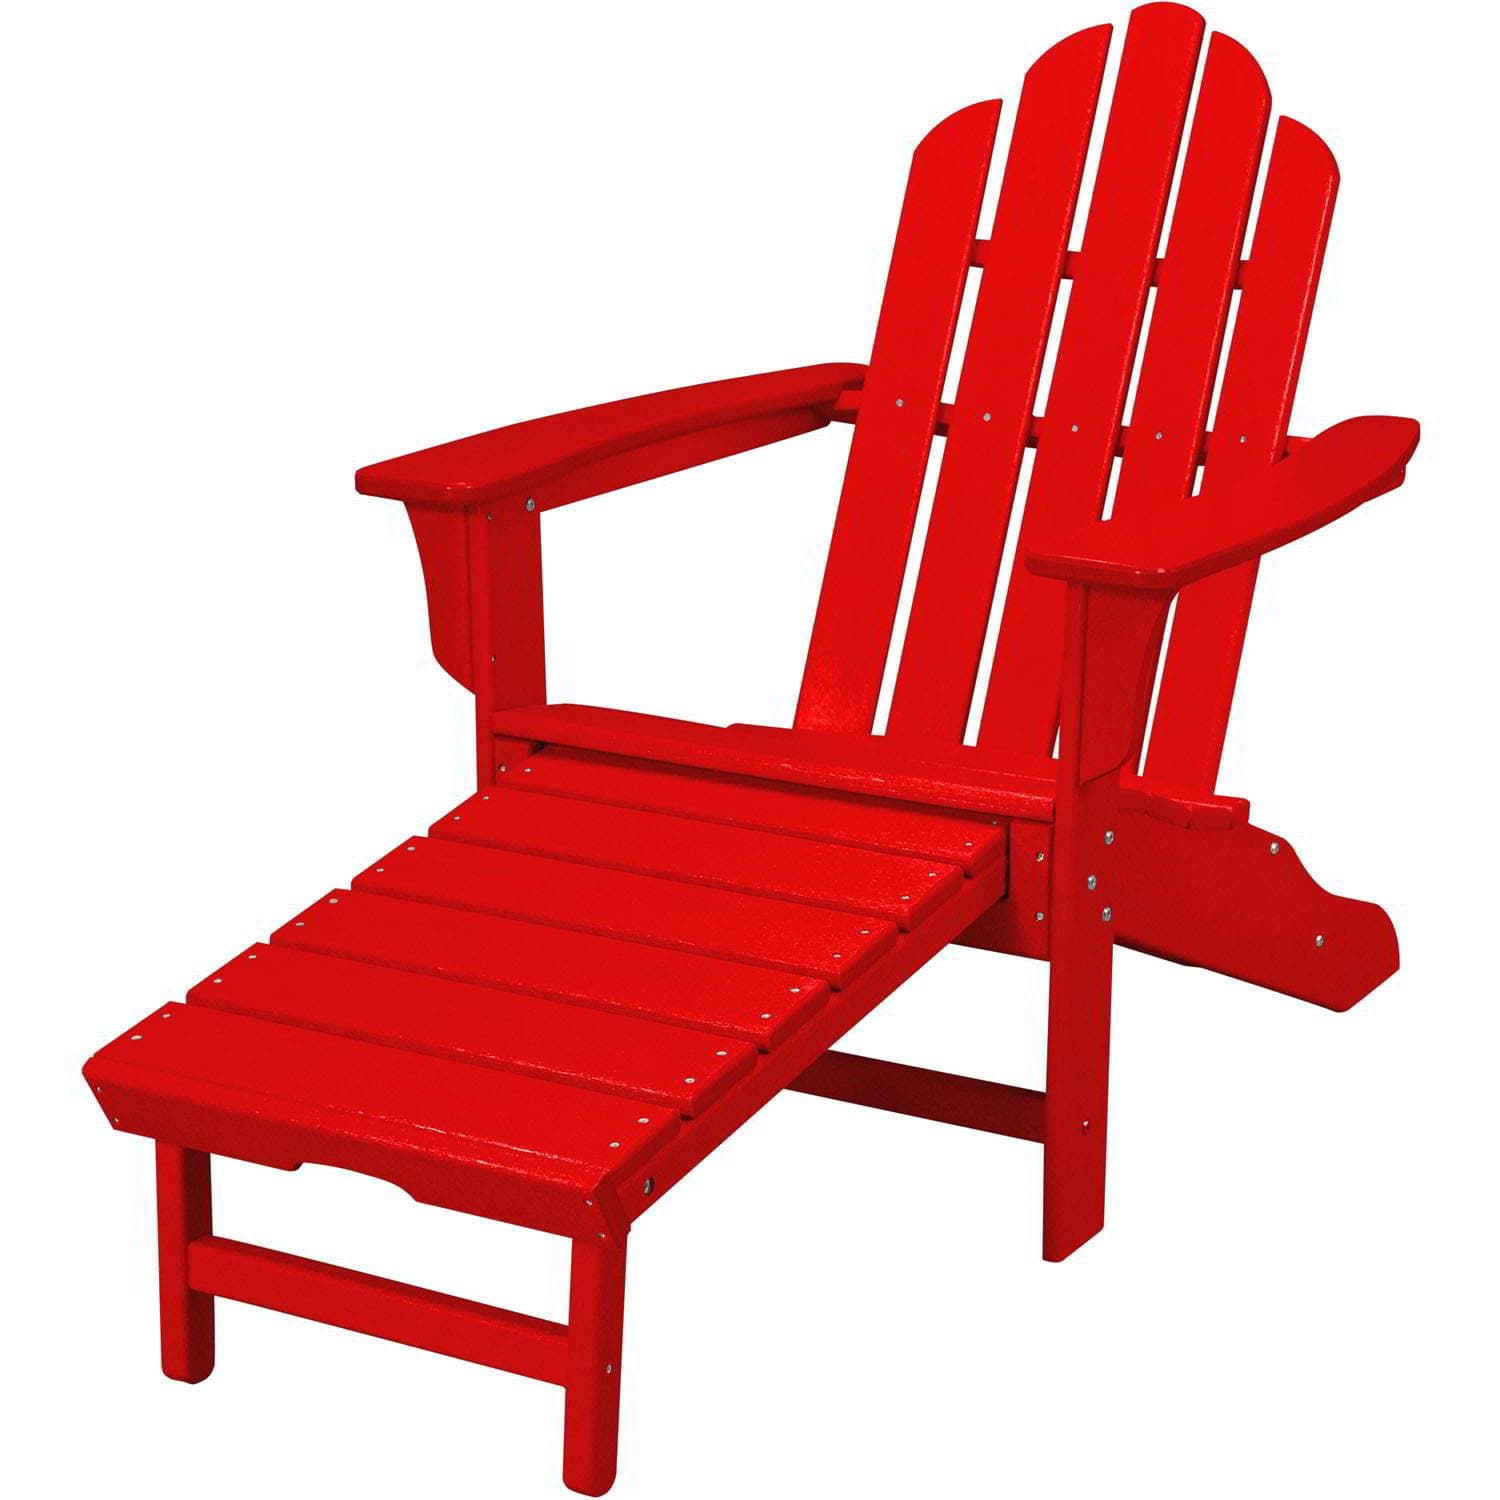 Hanover Adirondack Chair Hanover All-Weather Contoured Adirondack Chair with Hideaway Ottoman- Sunset Red